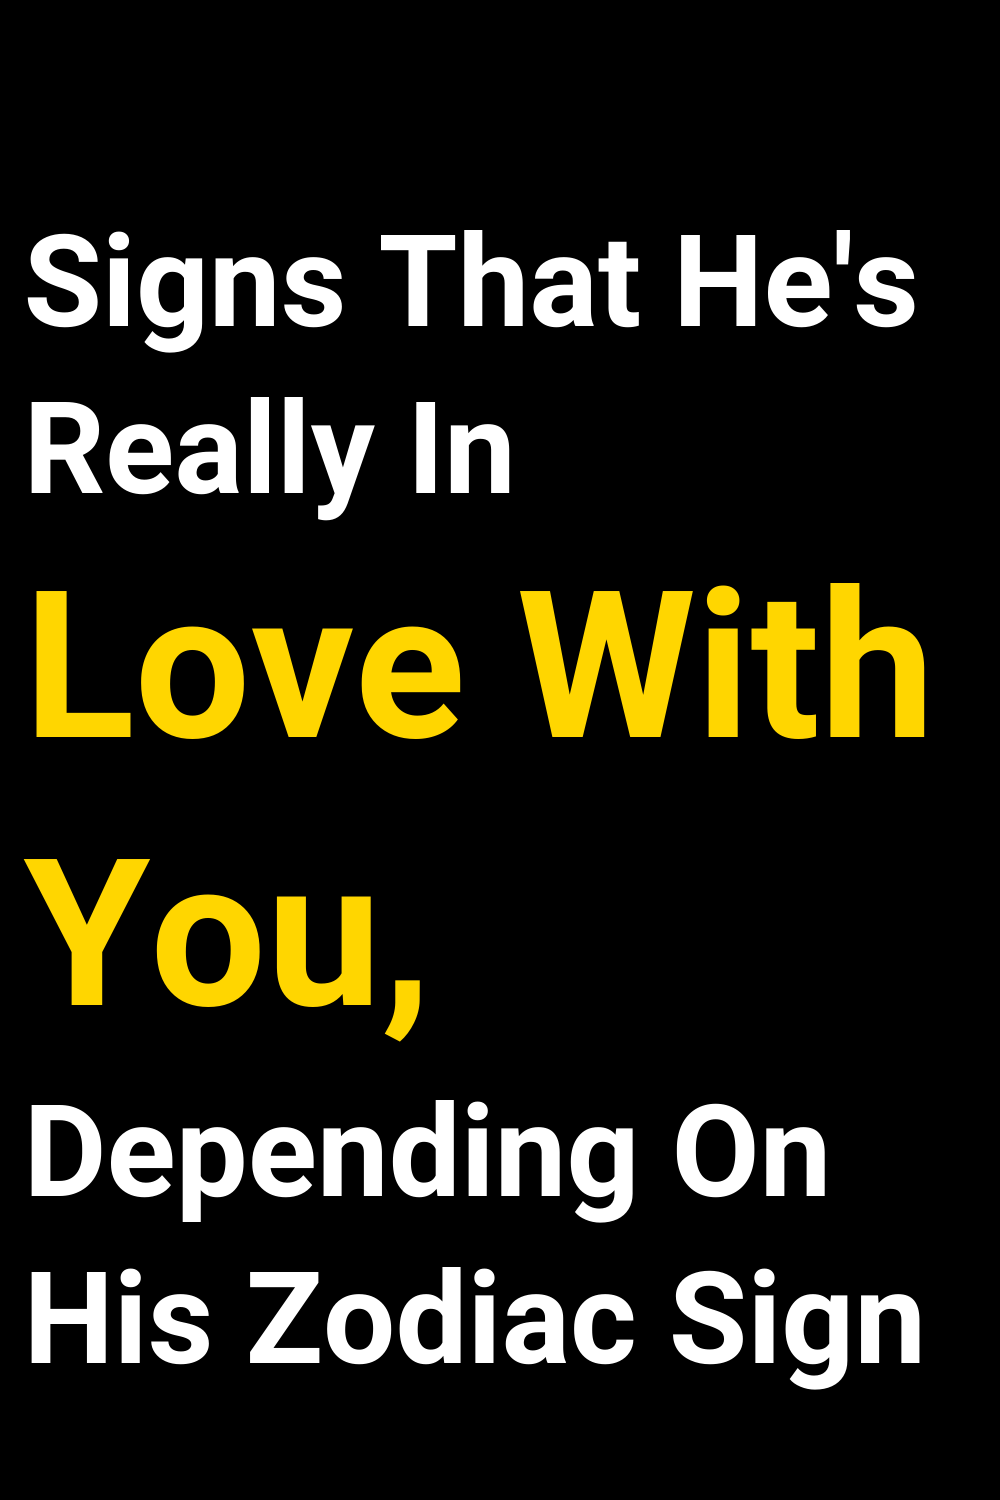 Signs That He's Really In Love With You, Depending On His Zodiac Sign